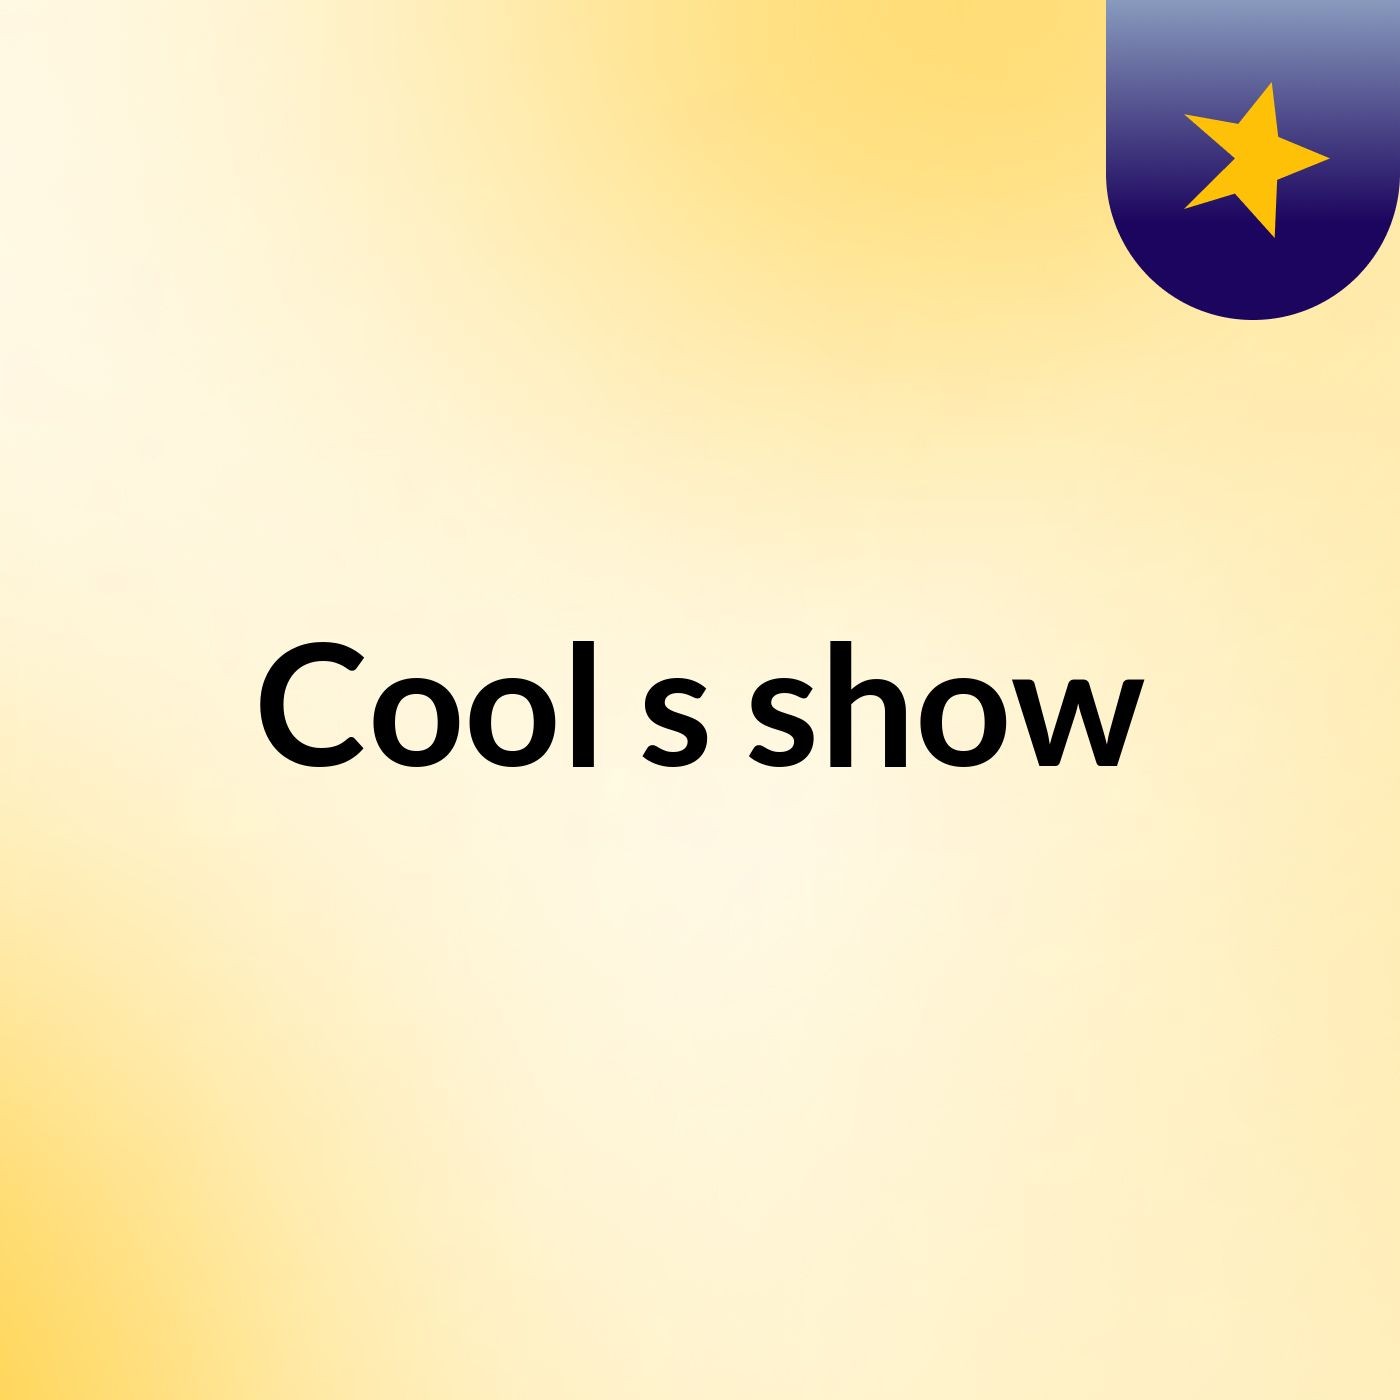 Cool's show